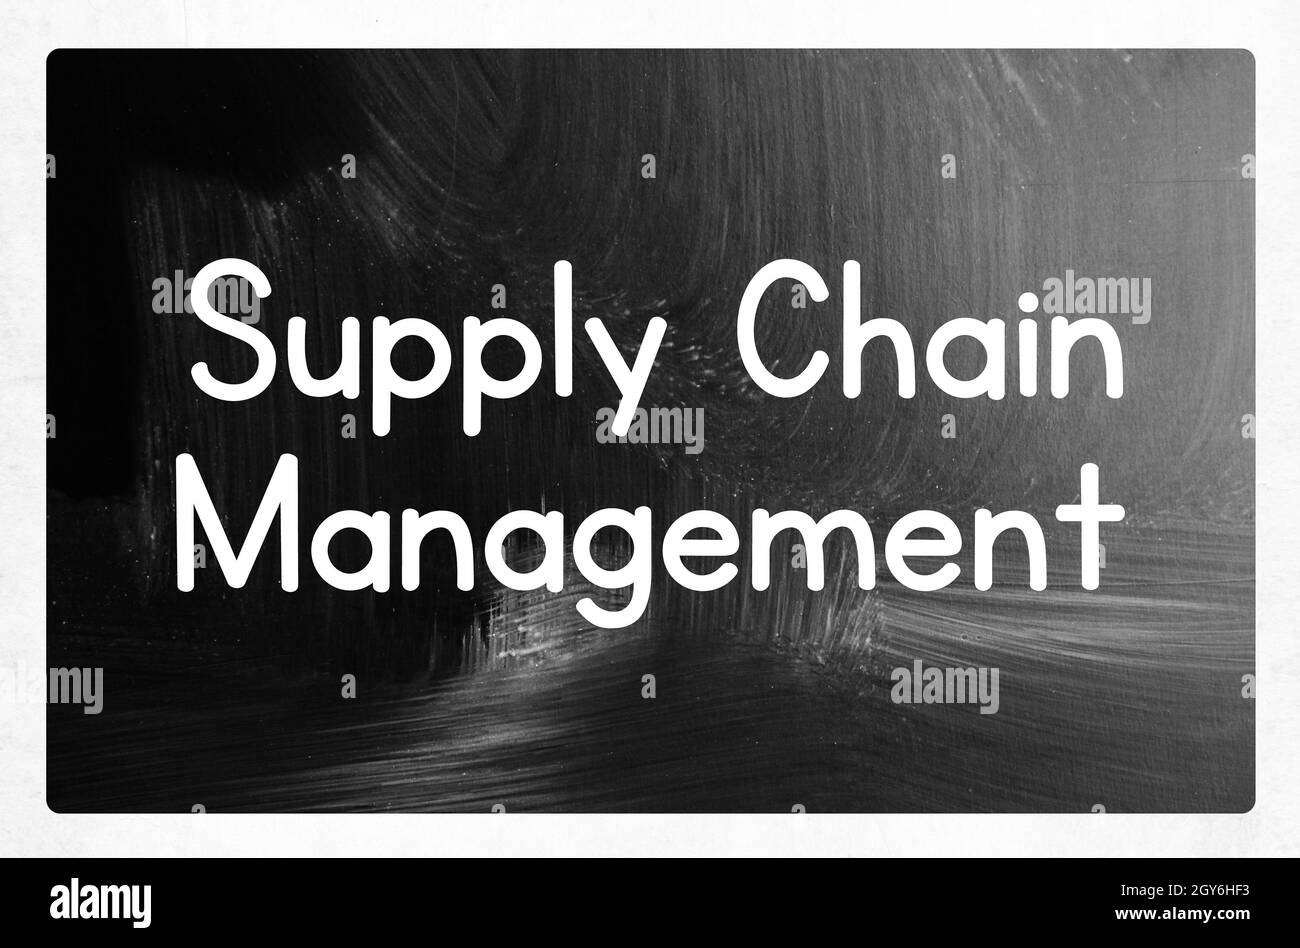 supply chain management concept Stock Photo